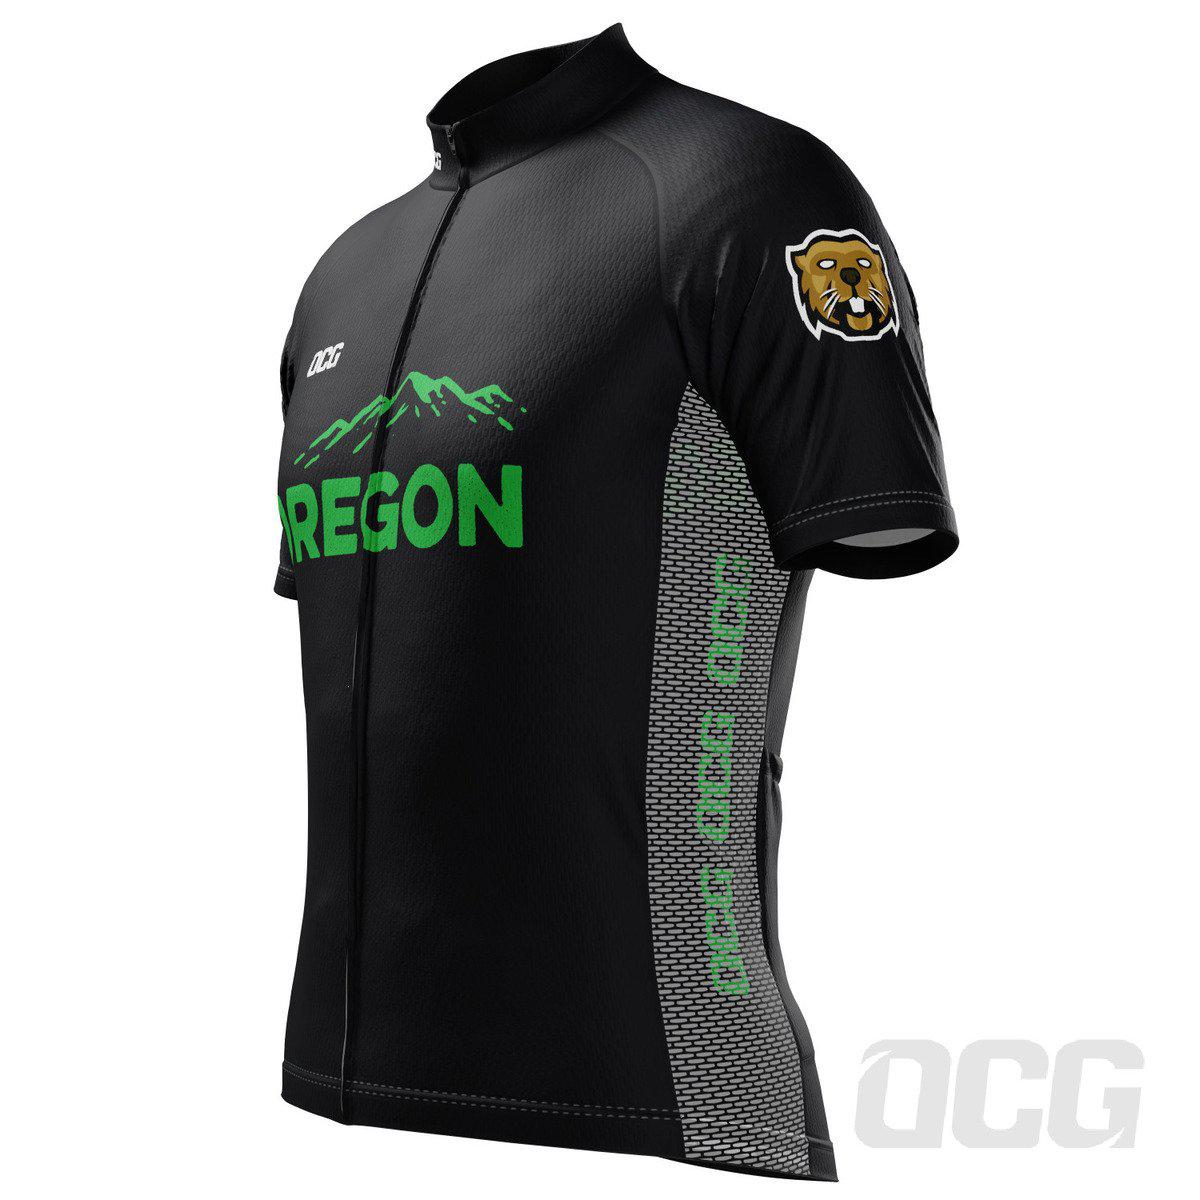 Men's Oregon State Short Sleeve Cycling Jersey